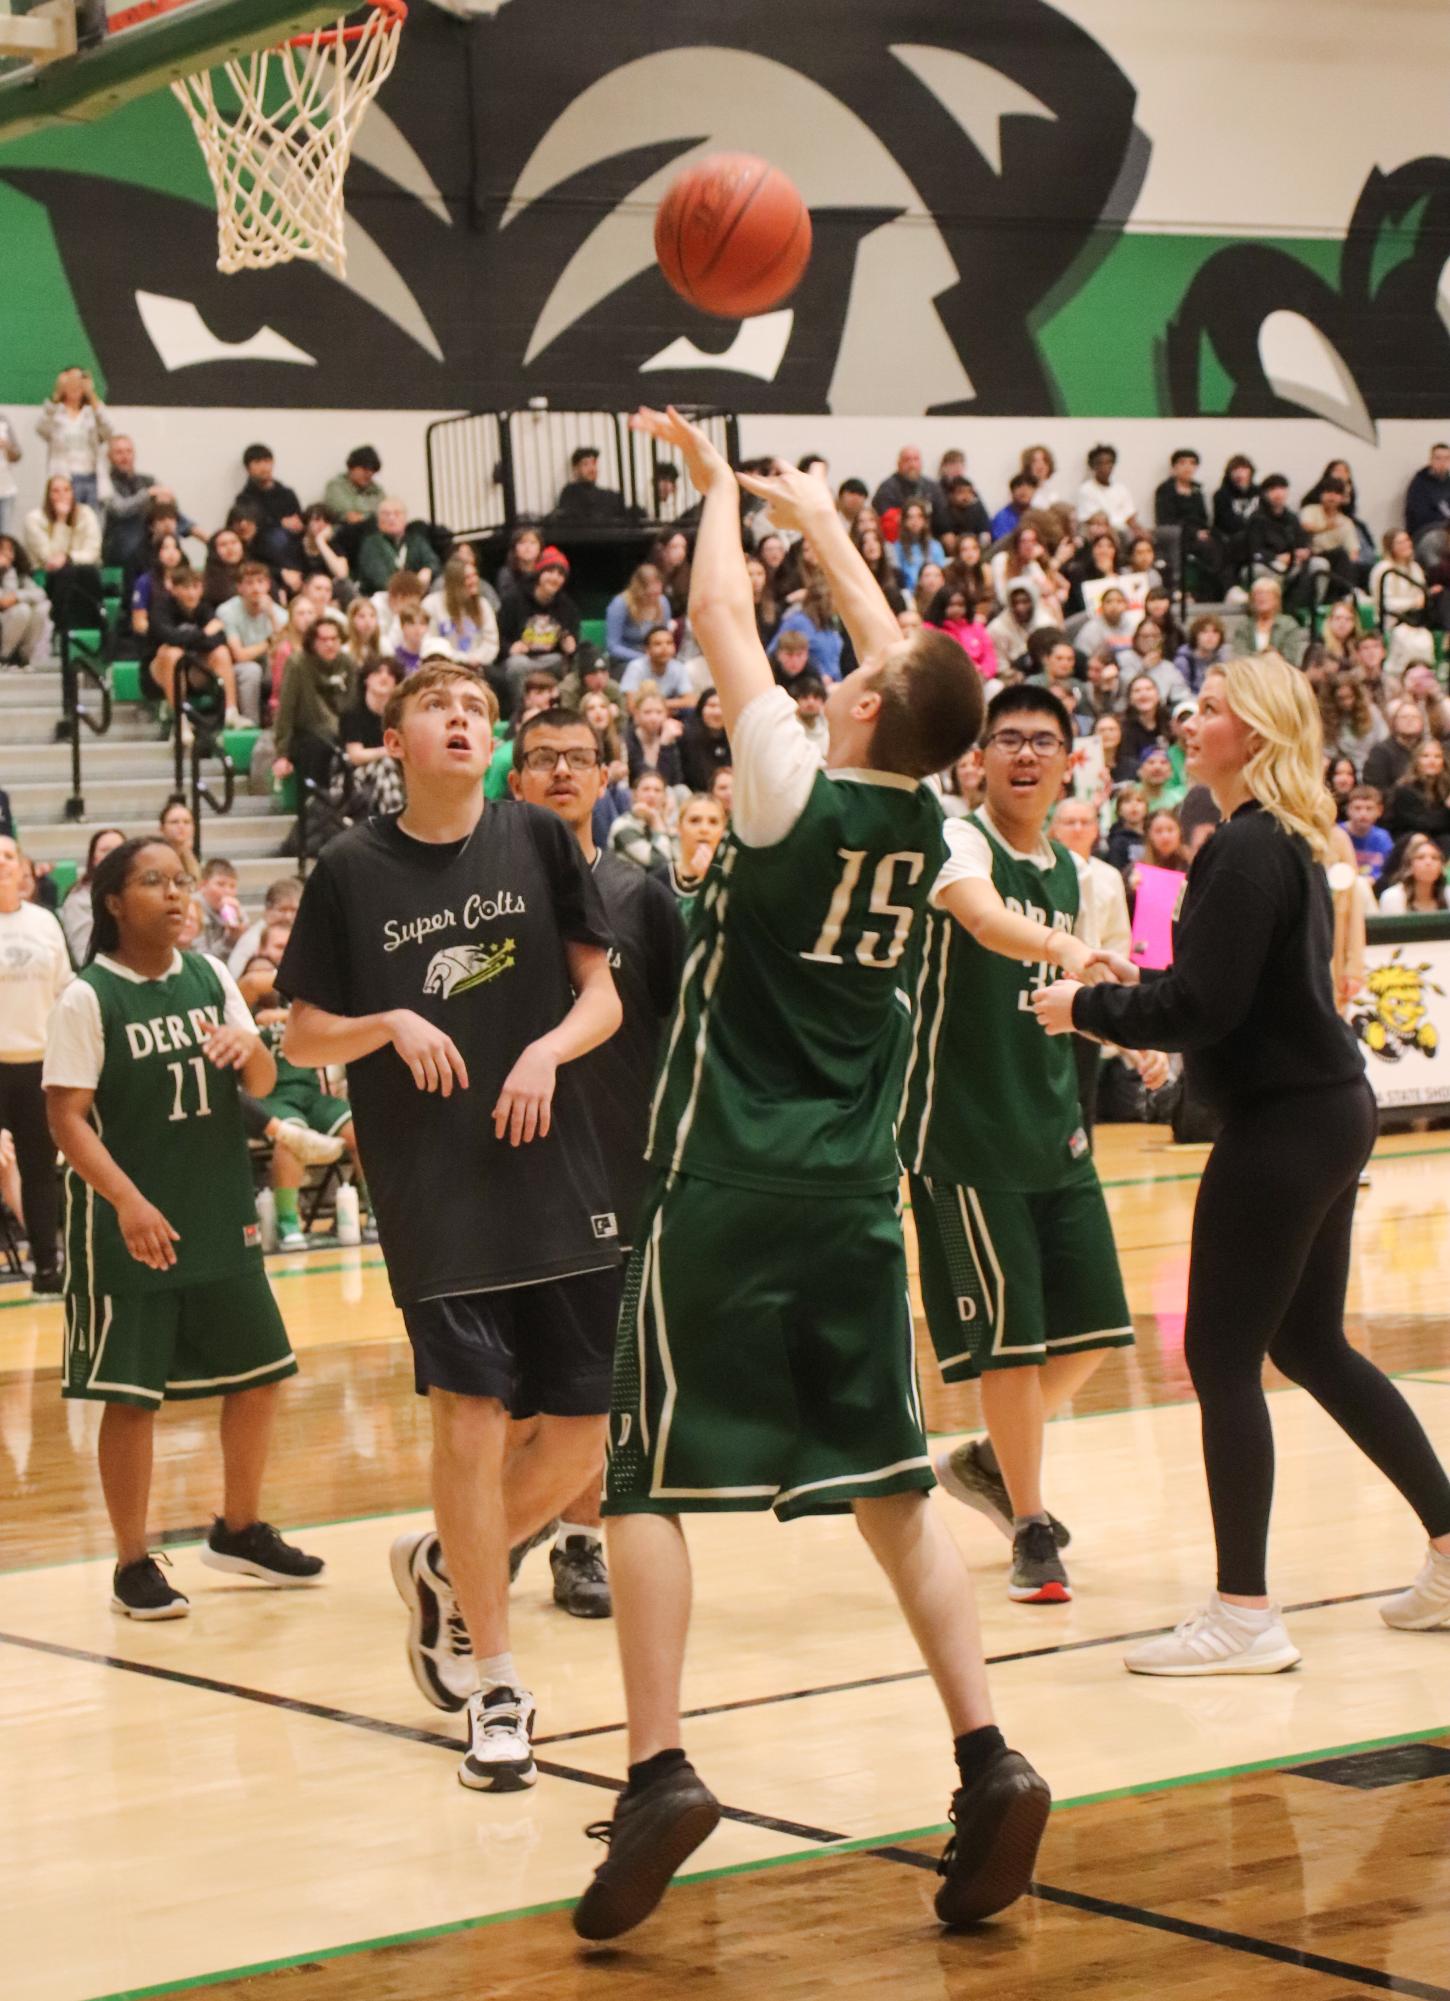 Panther+pals+Basketball+vs.+Campus+%28Photos+by+Laylah+Allen%29